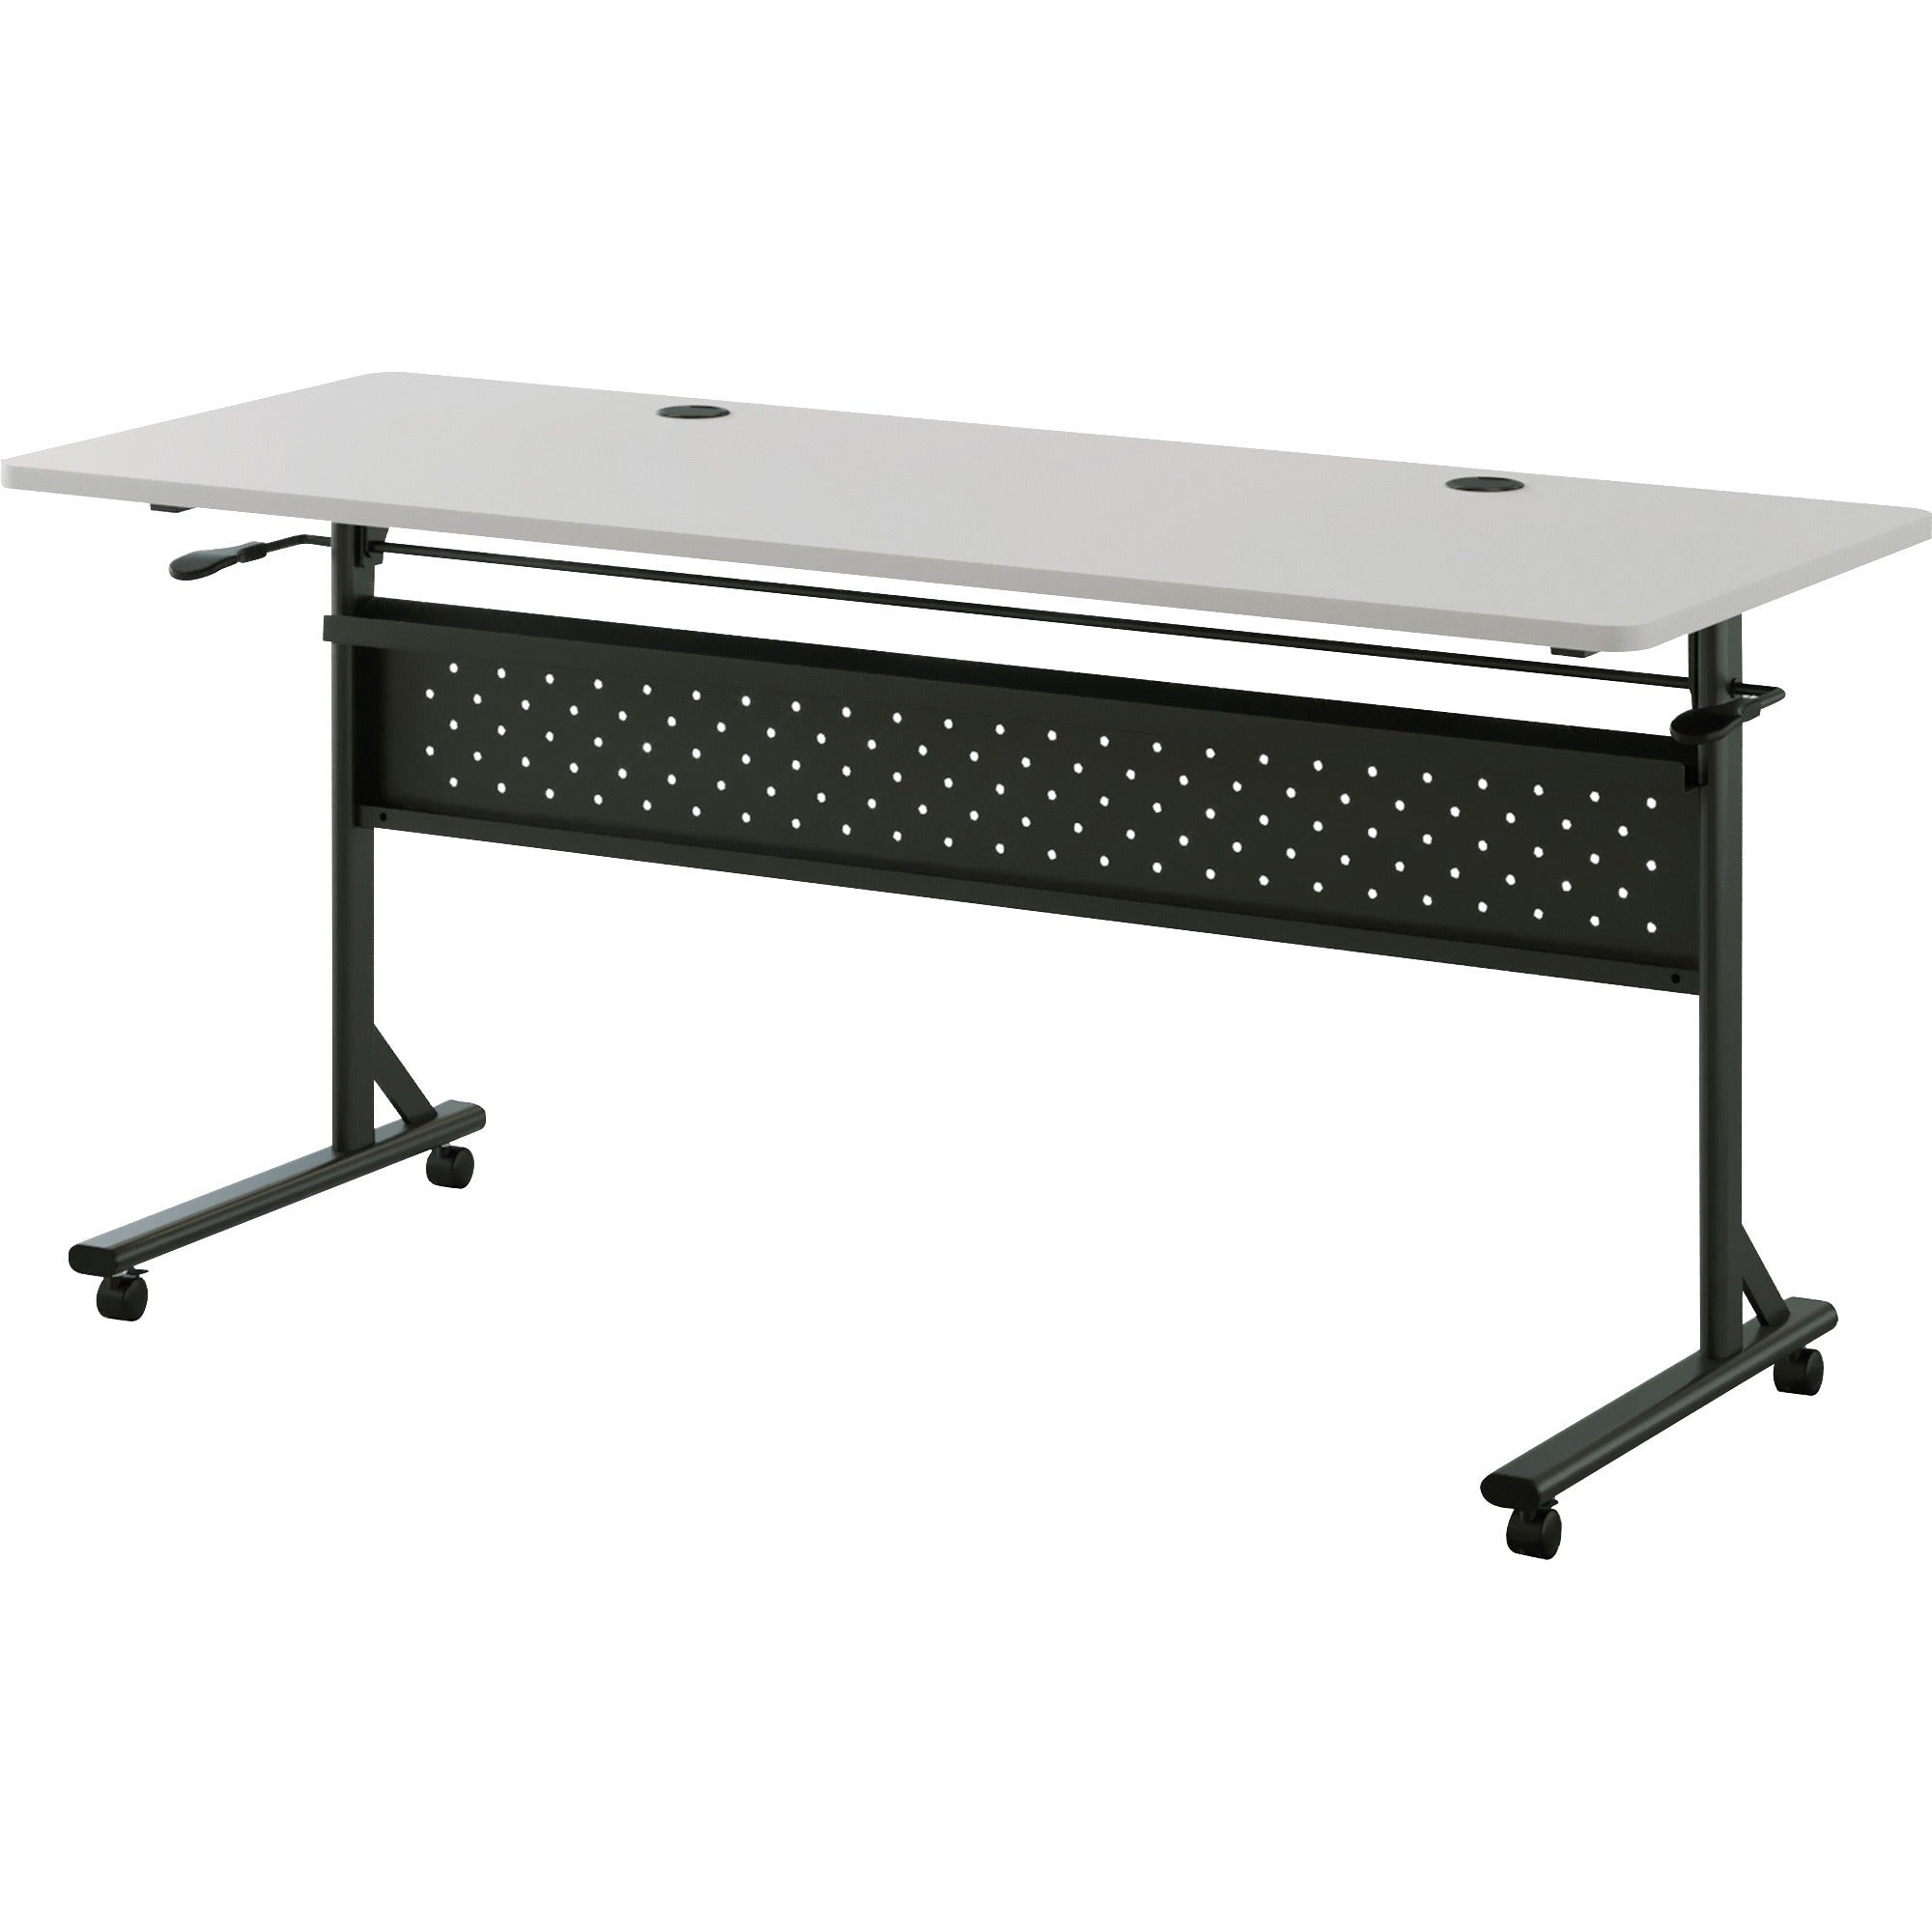 lorell-shift-20-flip-and-nesting-mobile-table-for-table-toplaminated-rectangle-top-60-table-top-length-x-24-table-top-width-x-1-table-top-thickness-2950-height-assembly-required-gray-1-each_llr60766 - 4